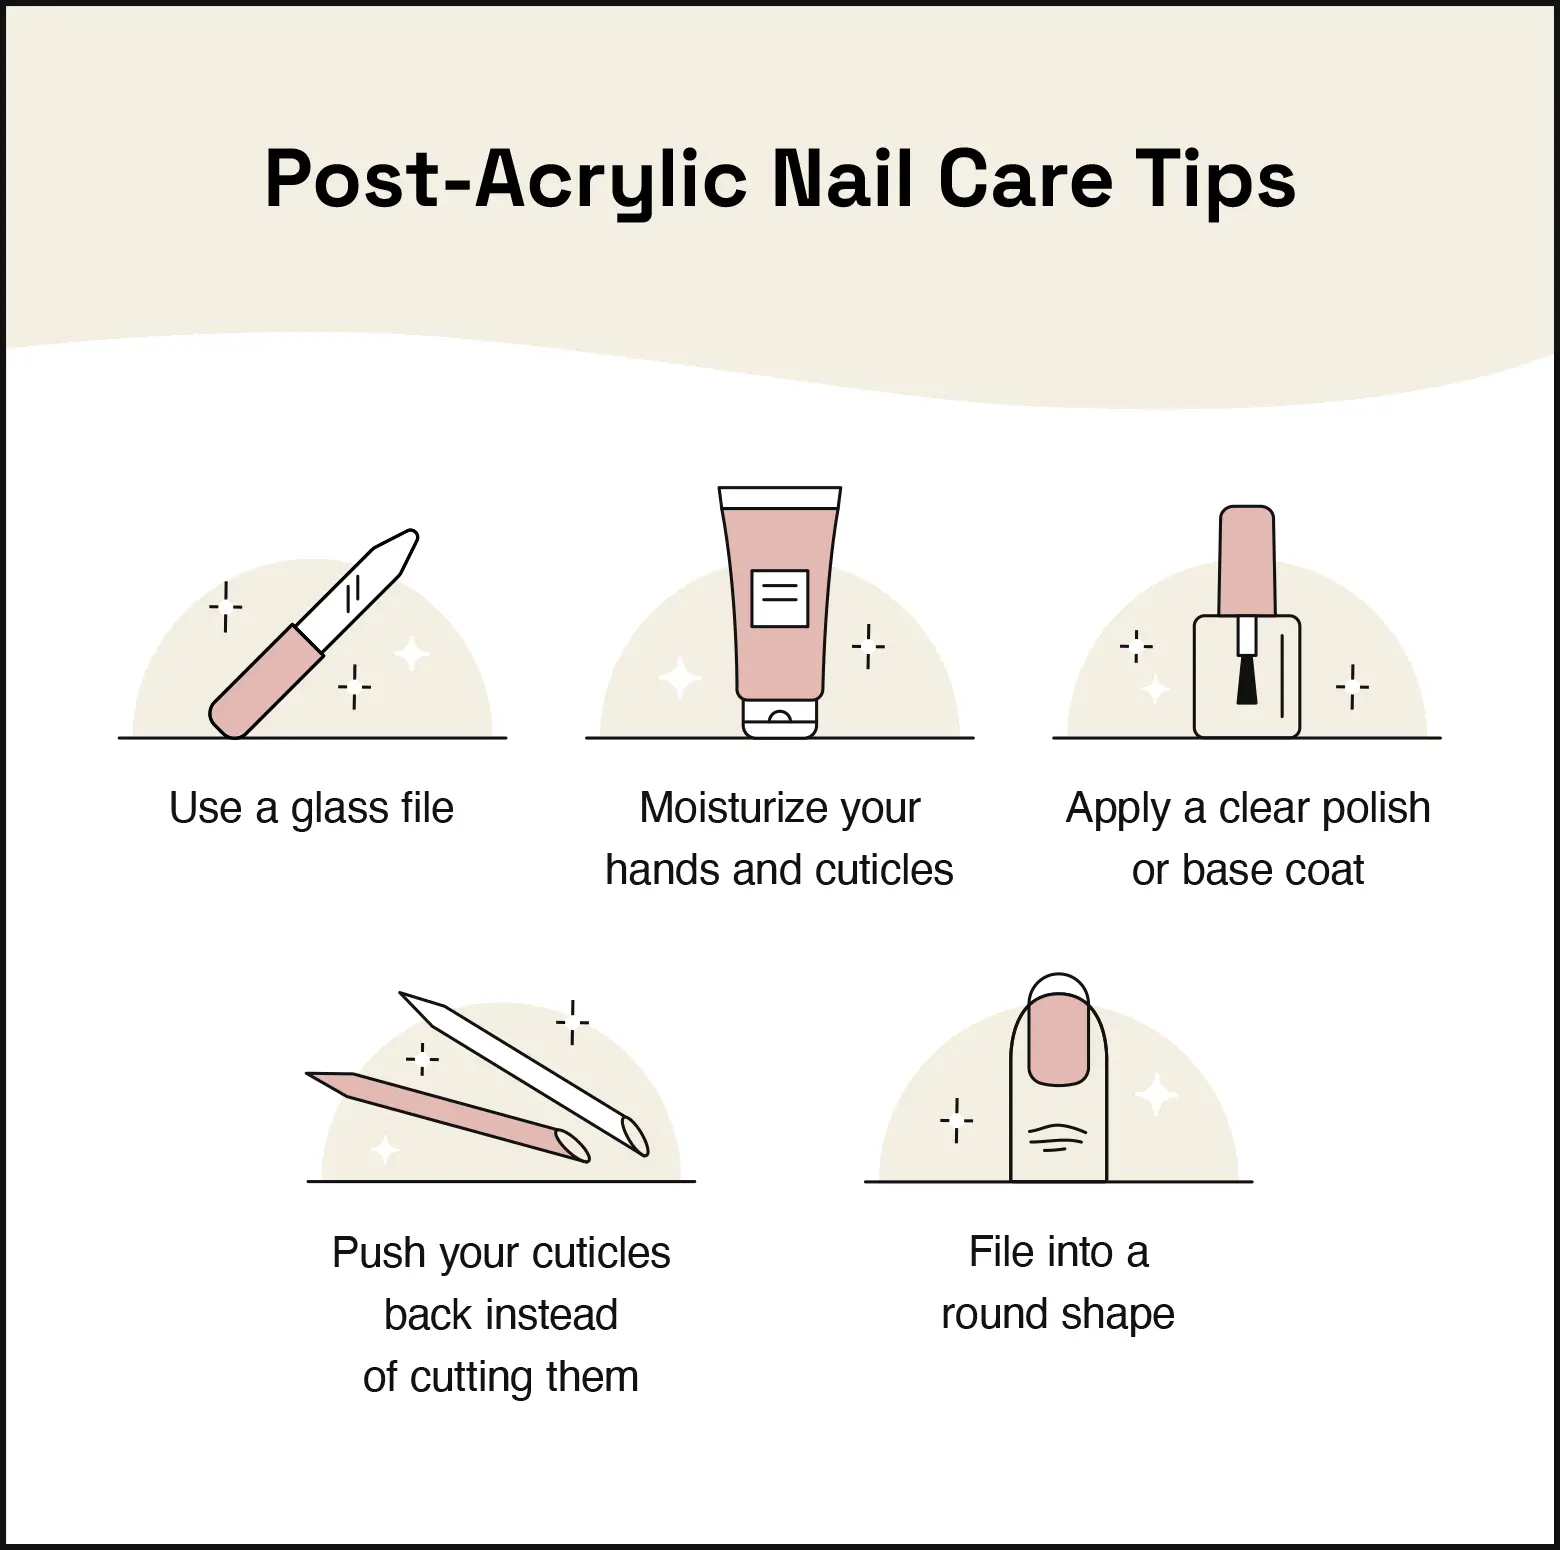 Image lists tips for caring for natural nails after removing acrylics.